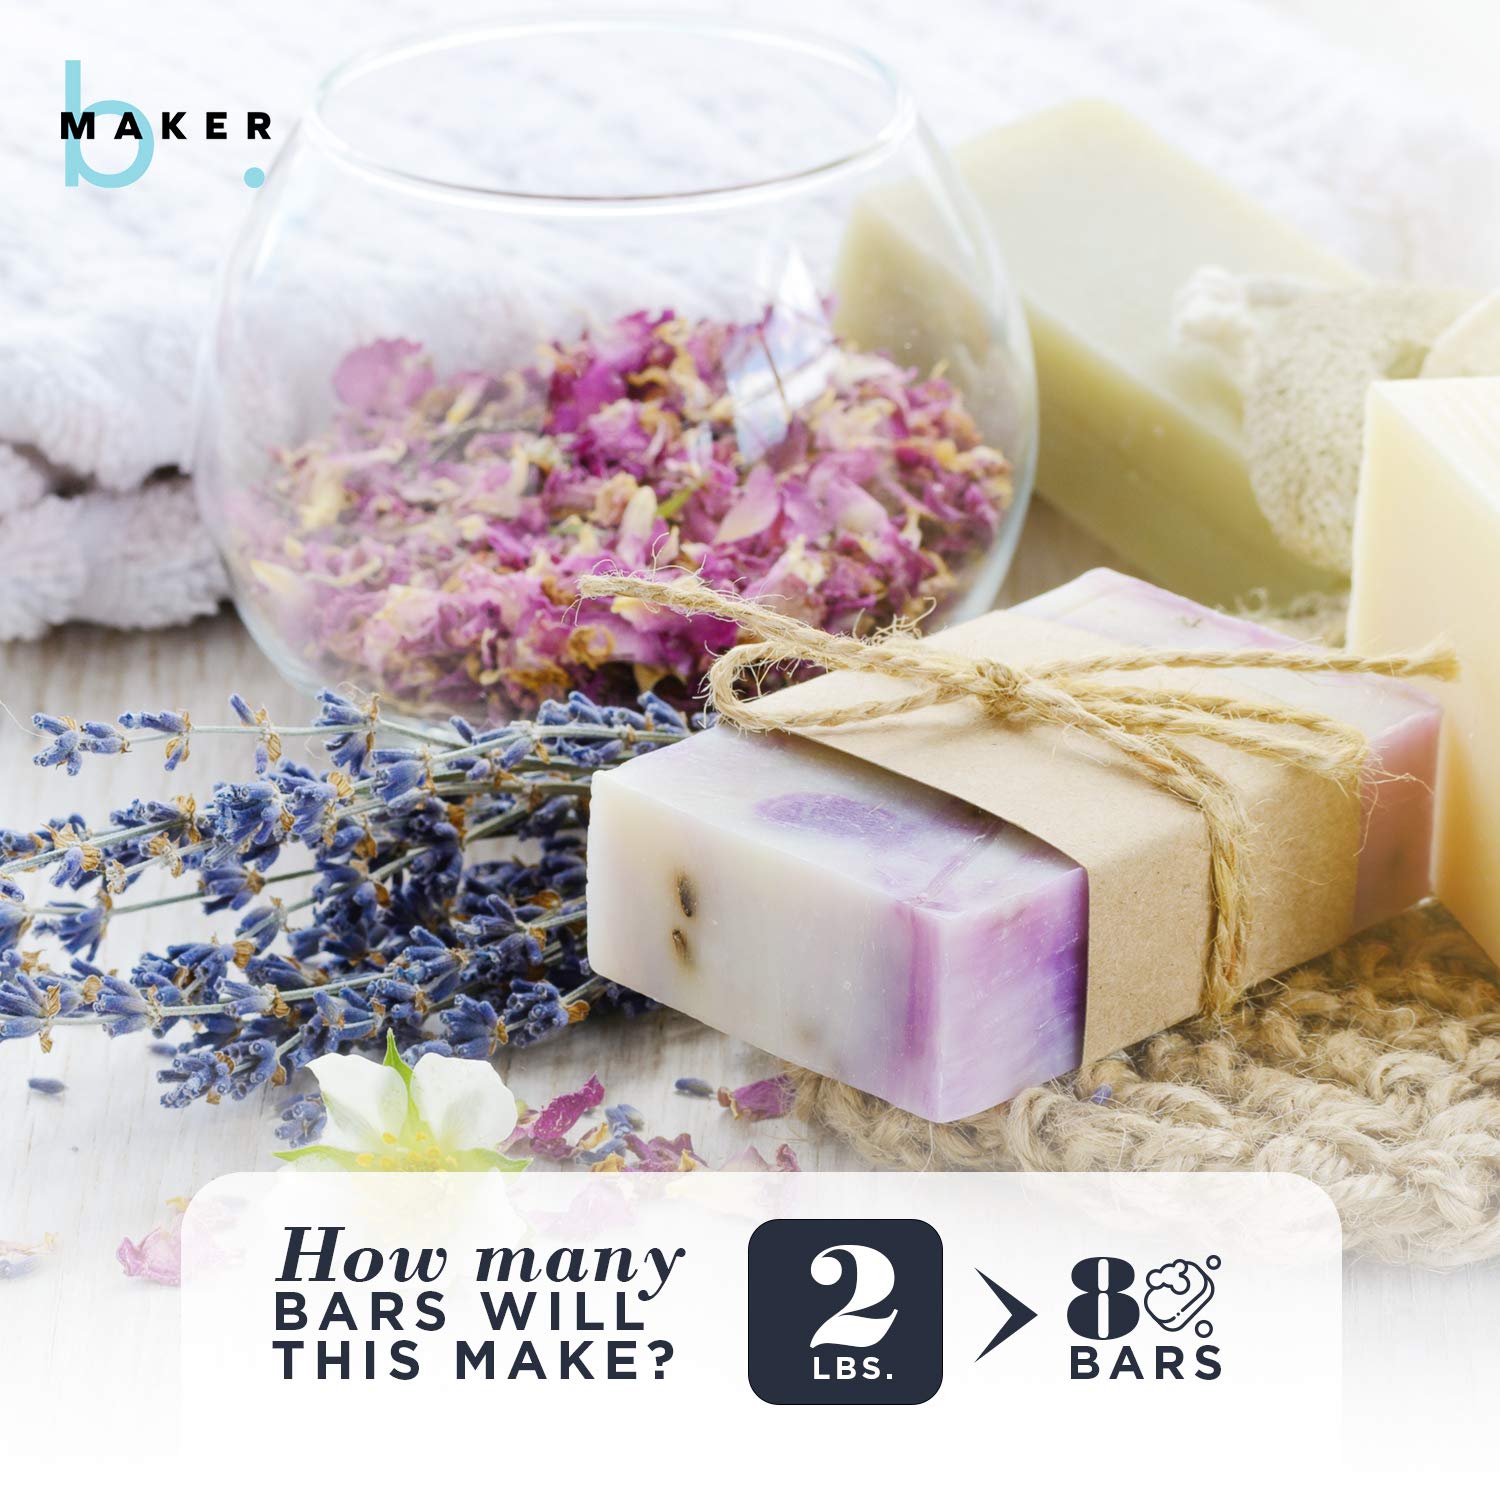 Goat's Milk Melt and Pour Soap Base - Crafter's Choice